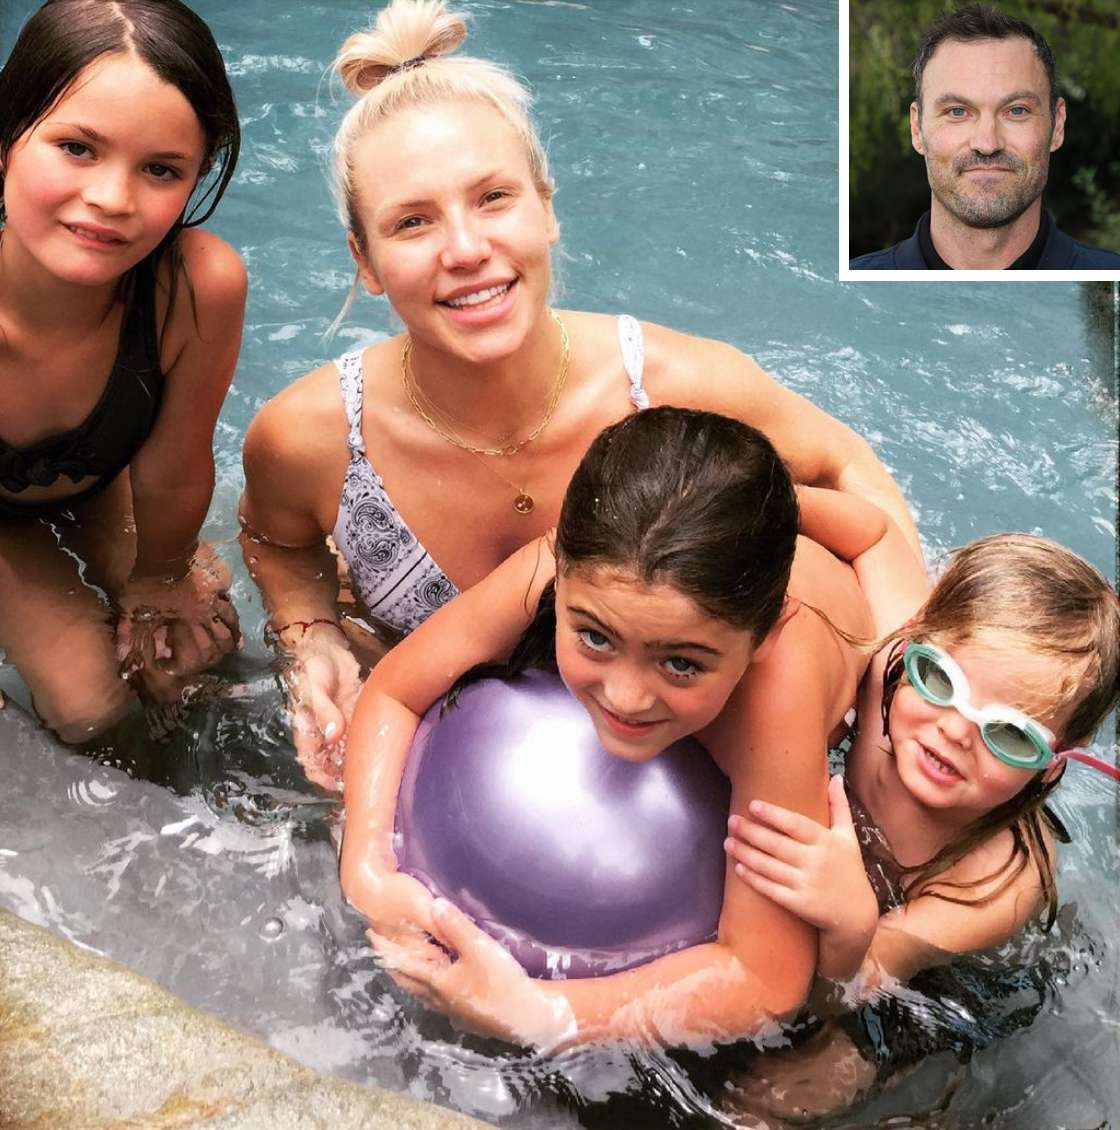 Brian Austin Green and Girlfriend Sharna Burgess Enjoy Pool Day with His Kids: 'The Best Days' - PEOPLE